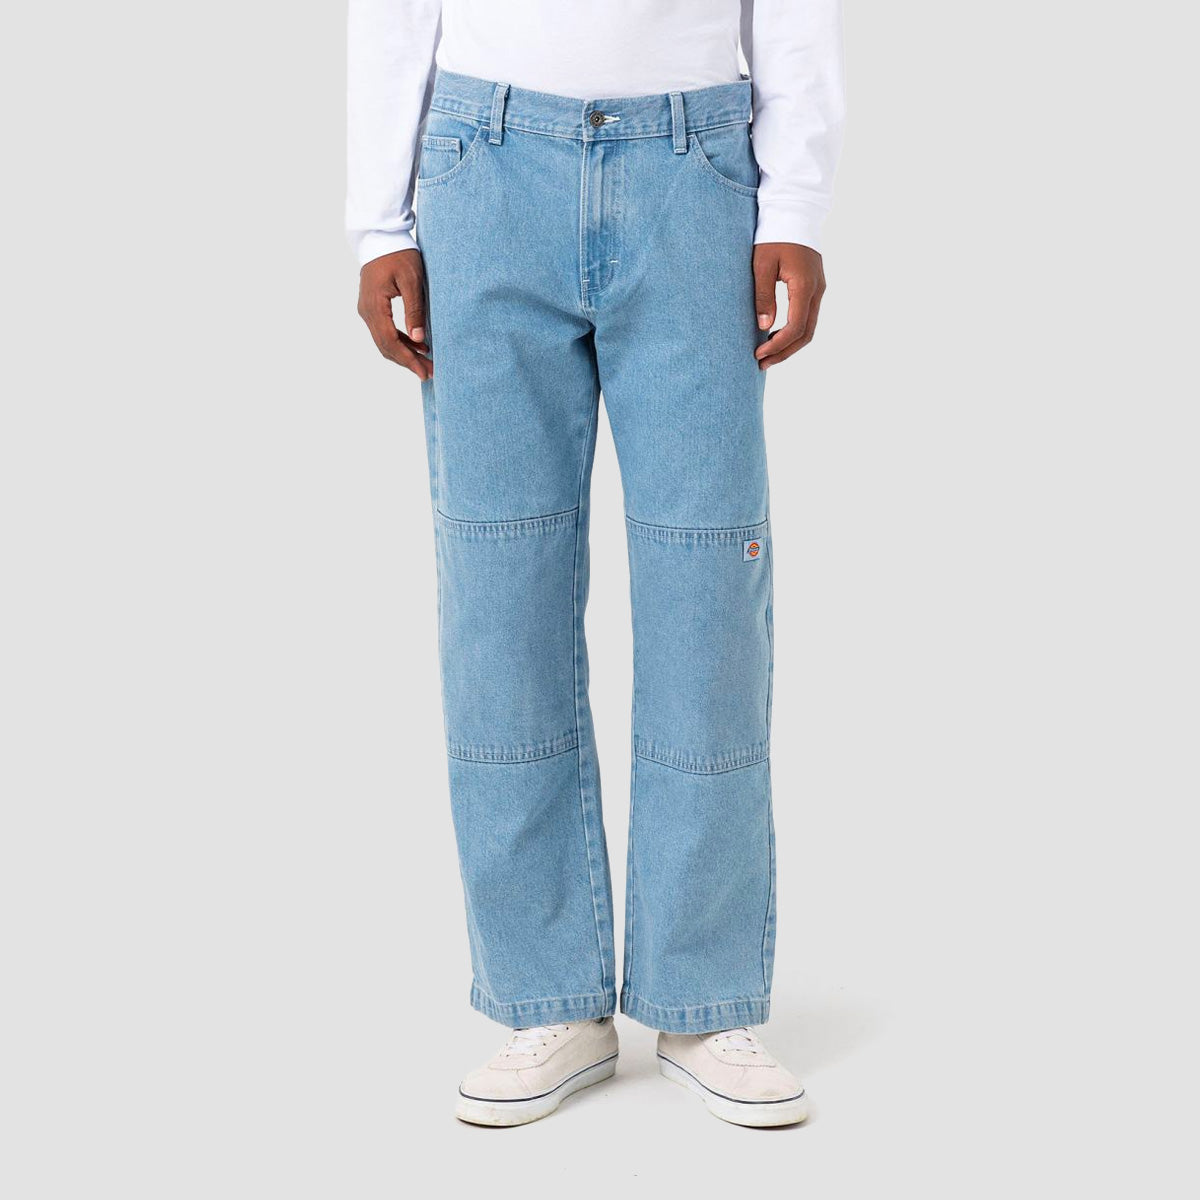 Dickies Double Knee Relaxed Fit Jeans Light Wash